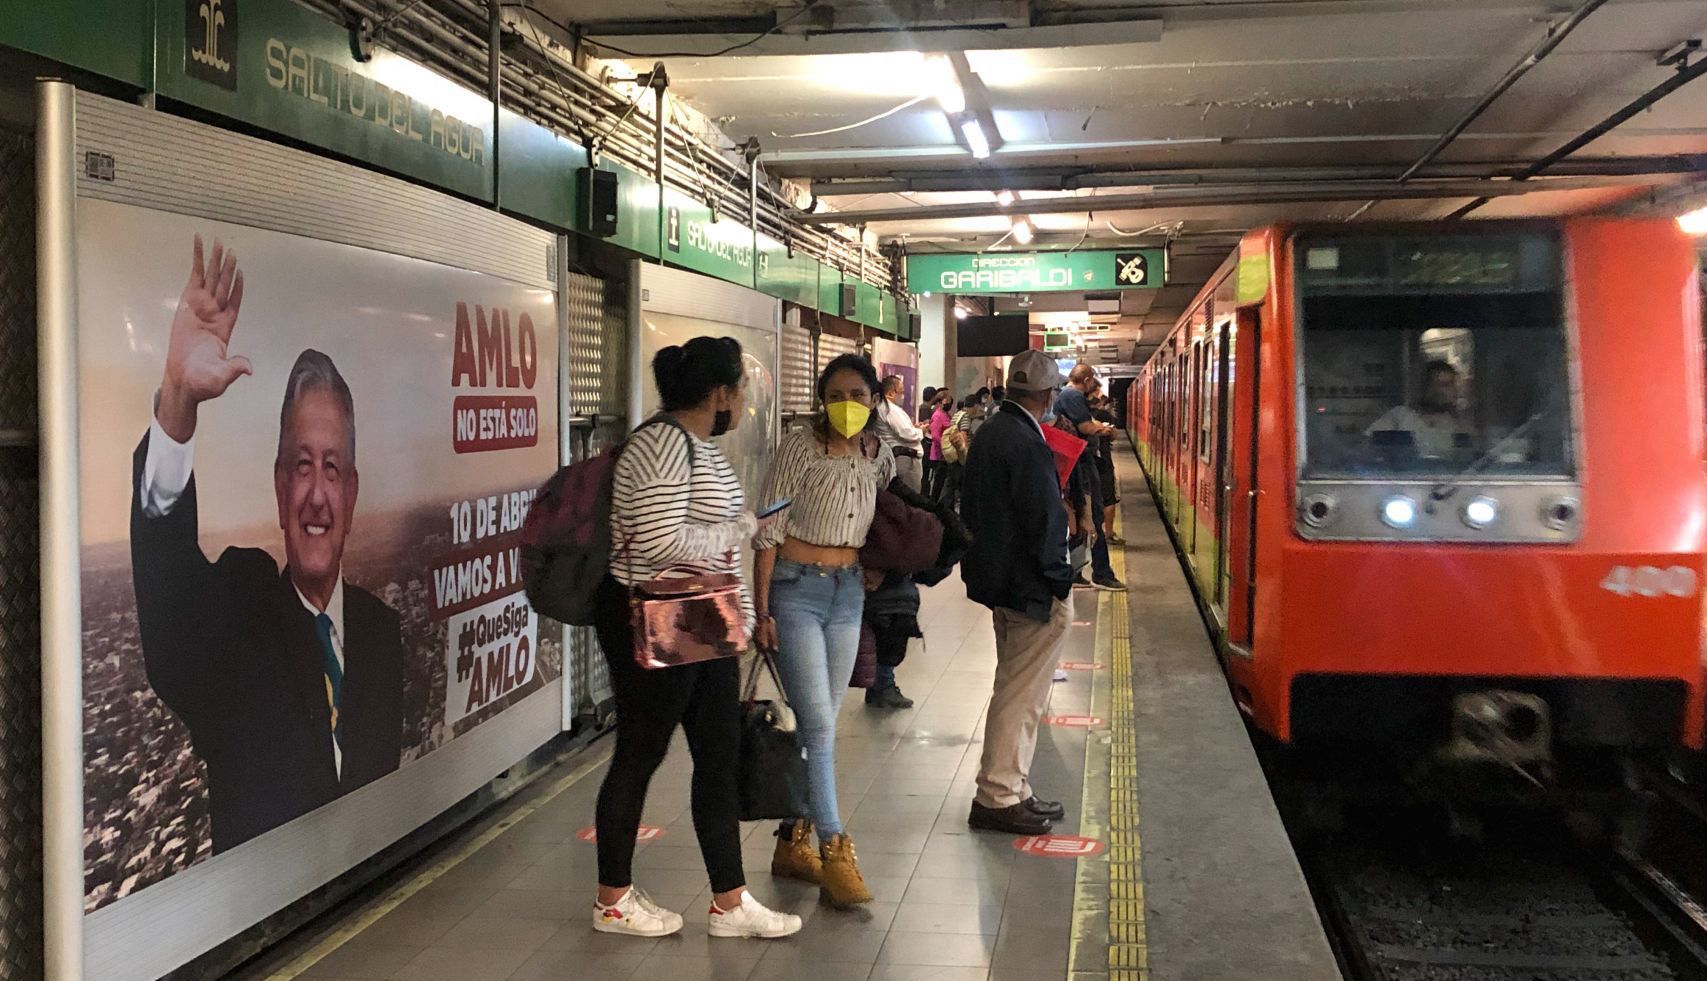 Donor of revocation announcements in the Metro is a contractor of CDMX